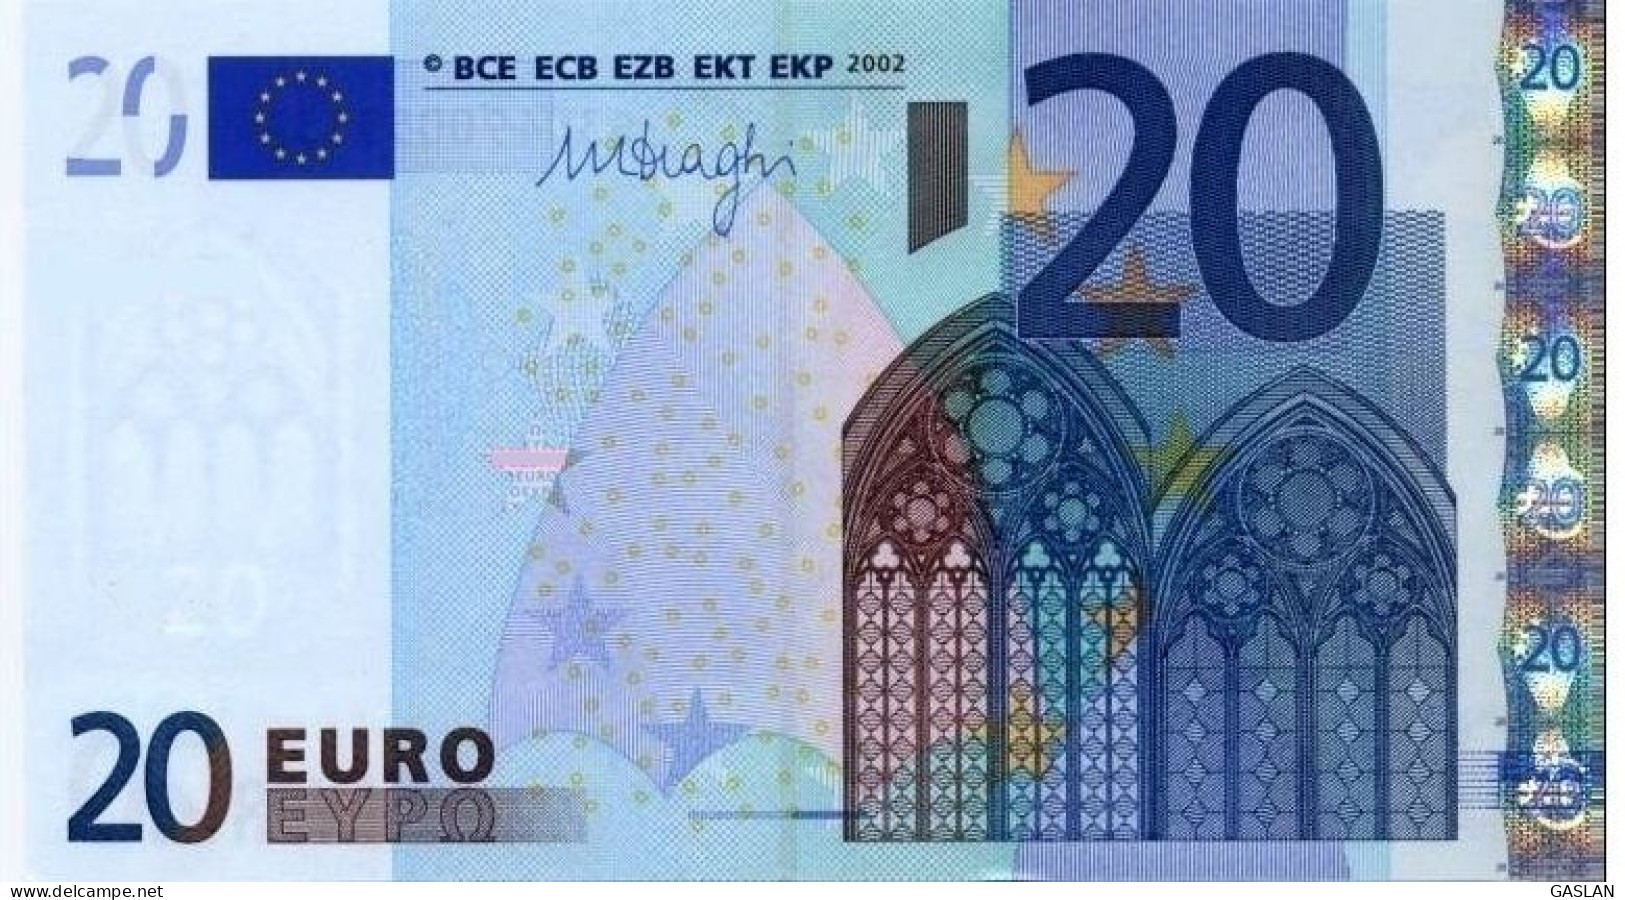 ESTONIA SLOVENIA FINLAND CYPUS 20 (D, USED)  H L G R027 UNC DRAGHI ONLY ONE CODE - 20 Euro